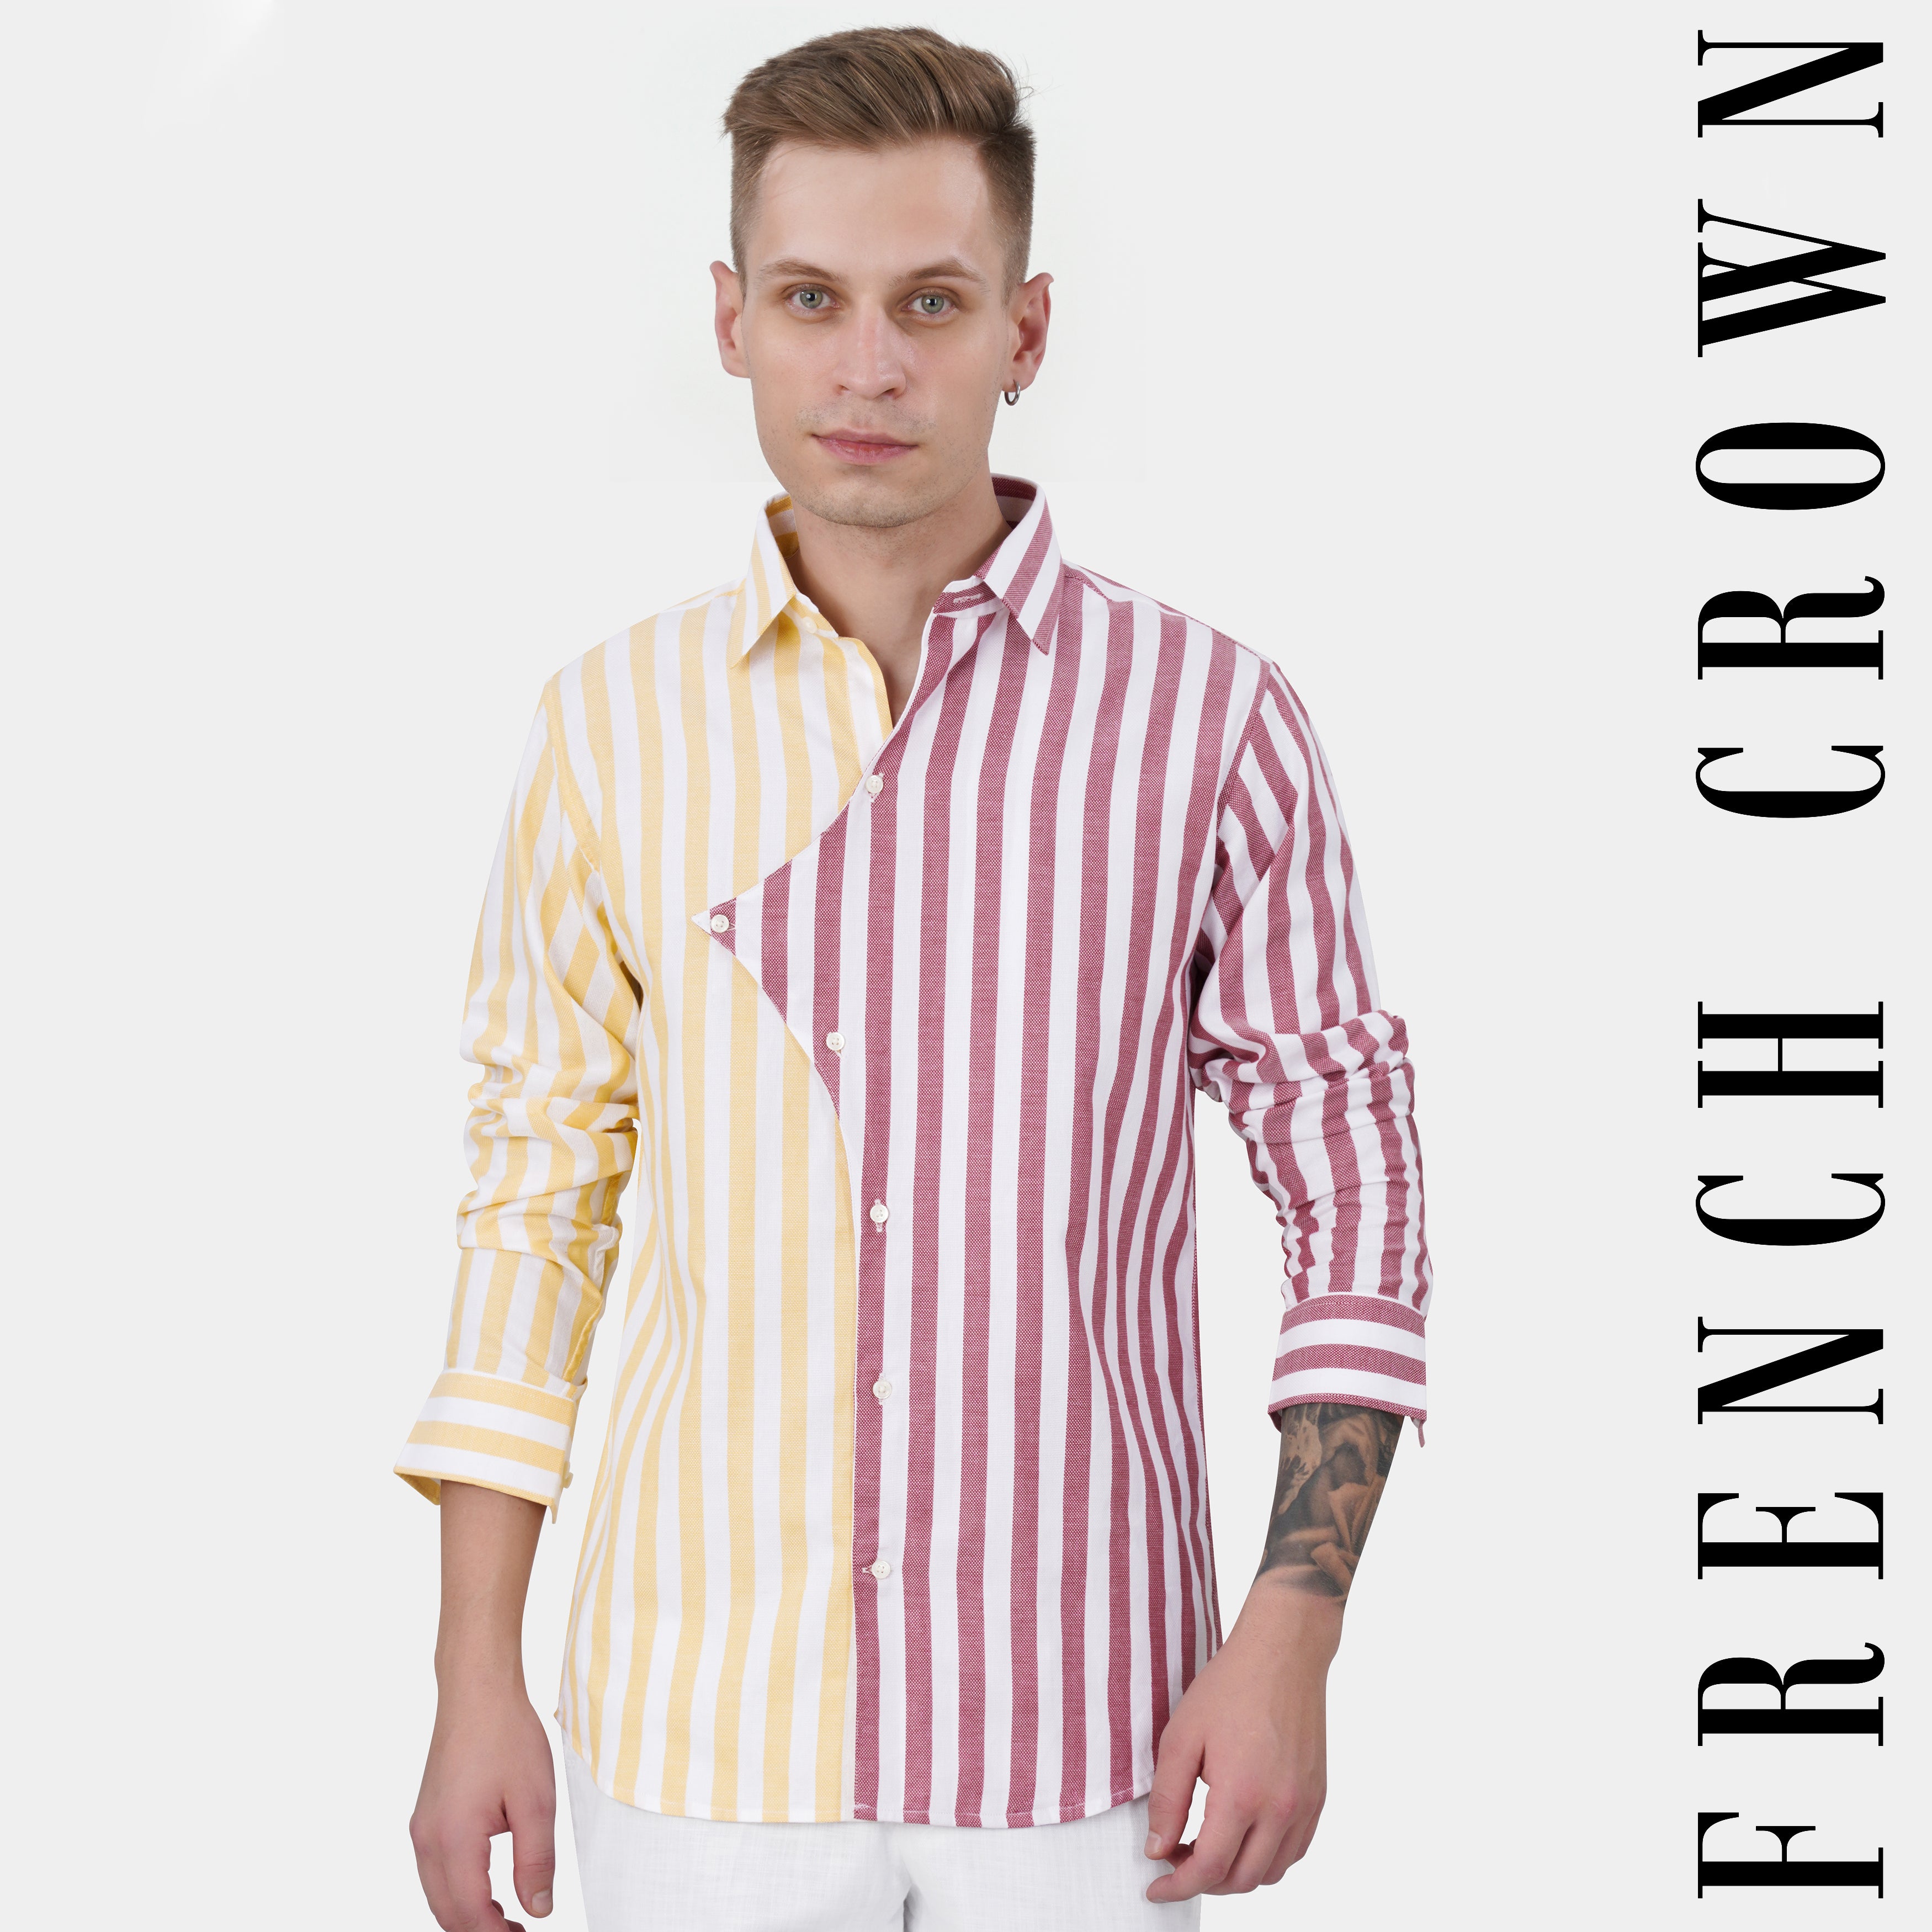 Hibiscus Pink with White and Navajo Yellow Striped Dobby Textured Premium Giza Cotton Designer Shirt 11710-D9-38, 11710-D9-H-38, 11710-D9-39, 11710-D9-H-39, 11710-D9-40, 11710-D9-H-40, 11710-D9-42, 11710-D9-H-42, 11710-D9-44, 11710-D9-H-44, 11710-D9-46, 11710-D9-H-46, 11710-D9-48, 11710-D9-H-48, 11710-D9-50, 11710-D9-H-50, 11710-D9-52, 11710-D9-H-52